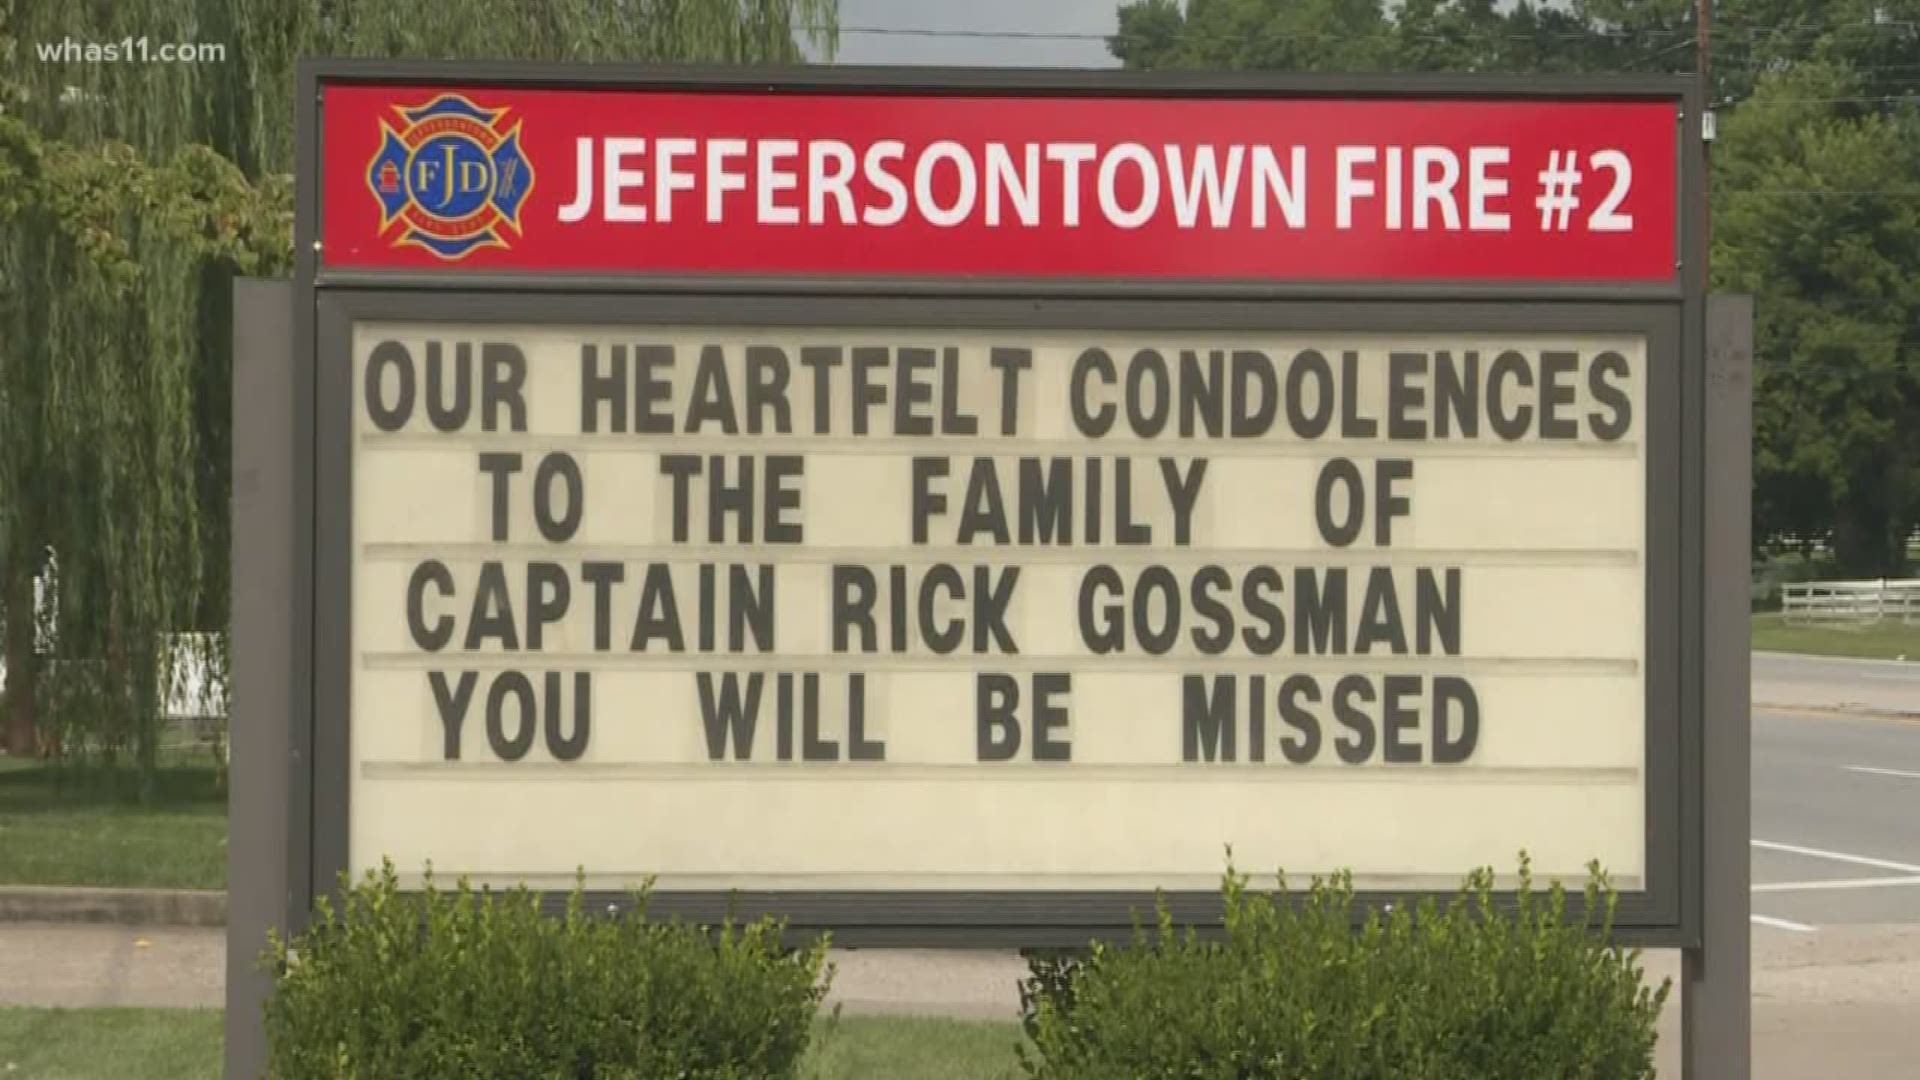 A close-knit community mourns the loss and honors the memory of a local fire captain who recently lost his battle with cancer.